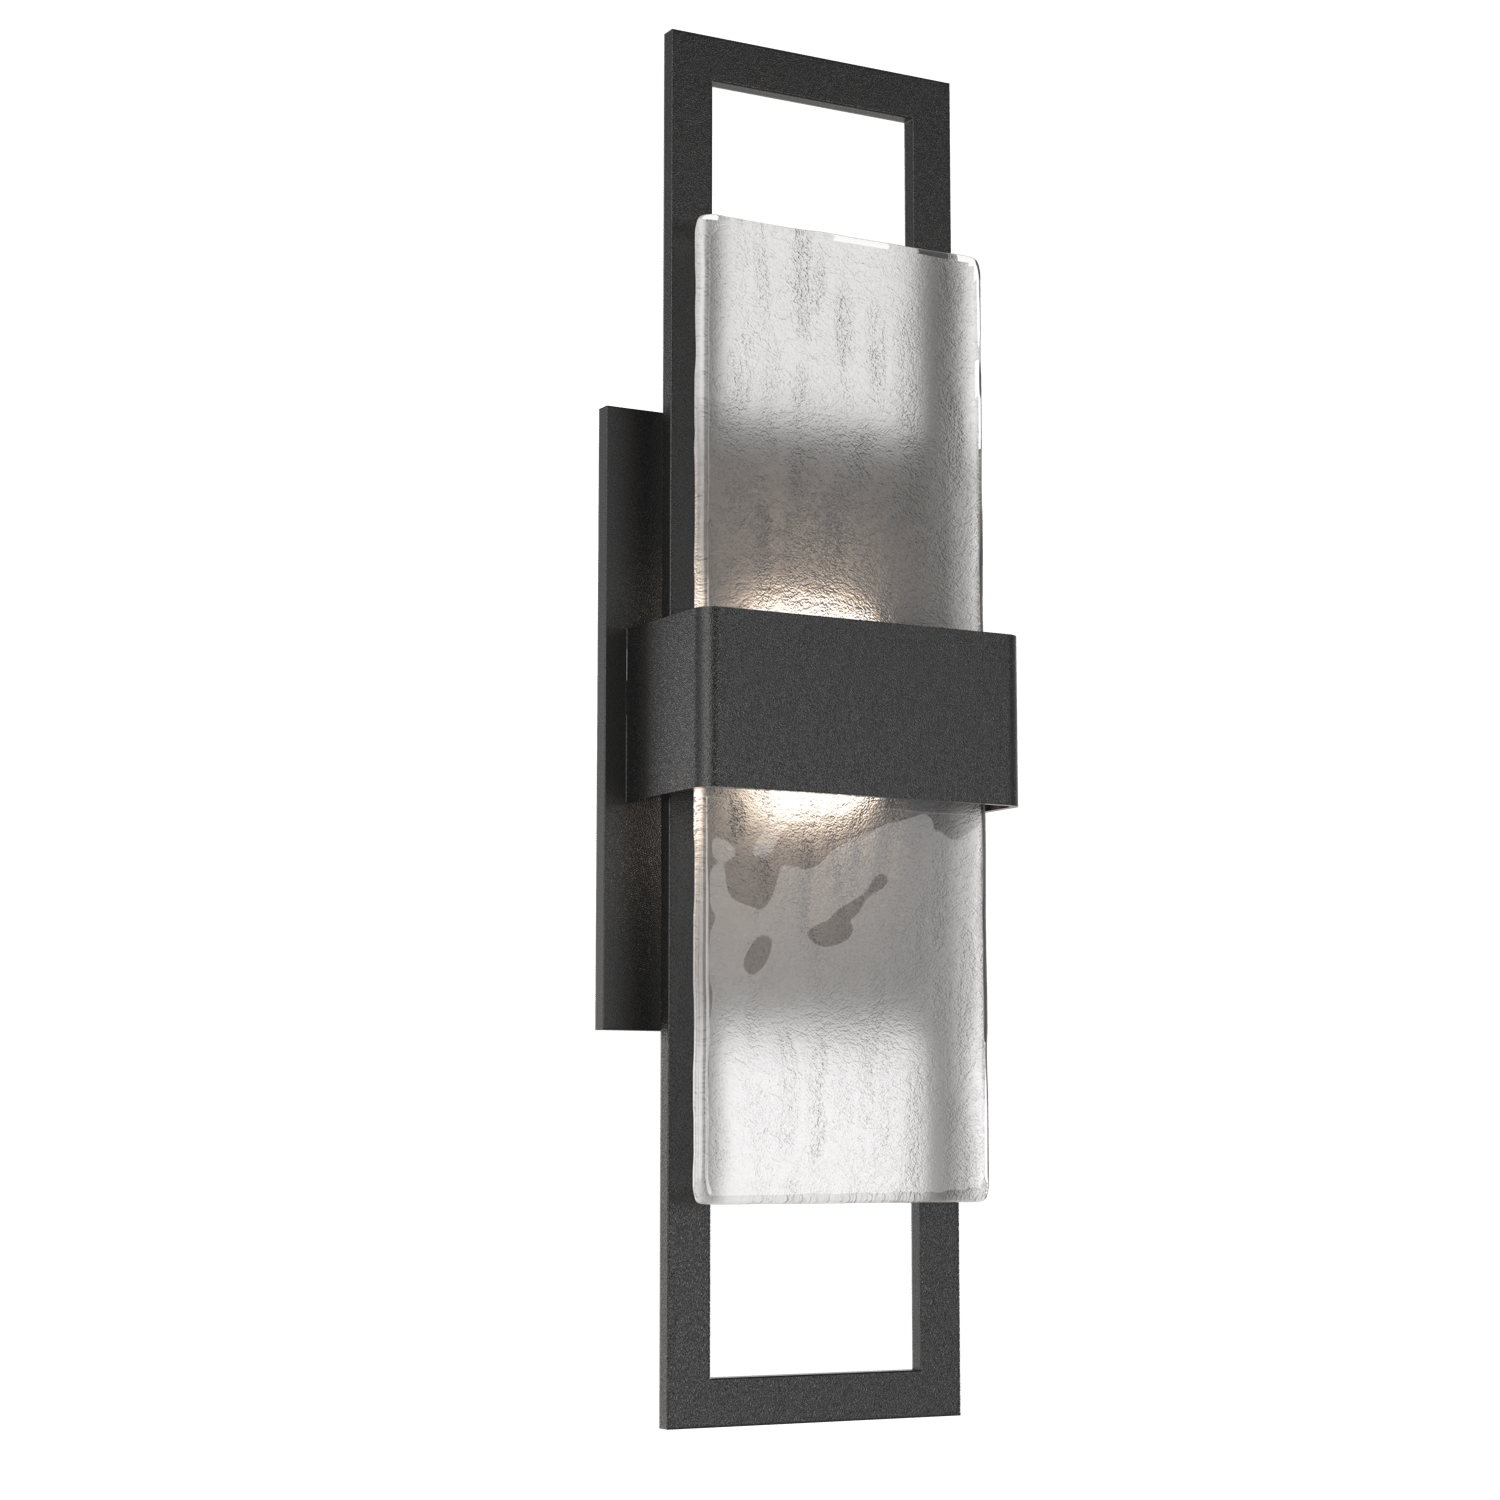 ODB0085-01-TB-CG-Hammerton-Studio-Sasha-20-inch-outdoor-sconce-with-textured-black-finish-and-clear-granite-glass-shades-and-LED-lamping